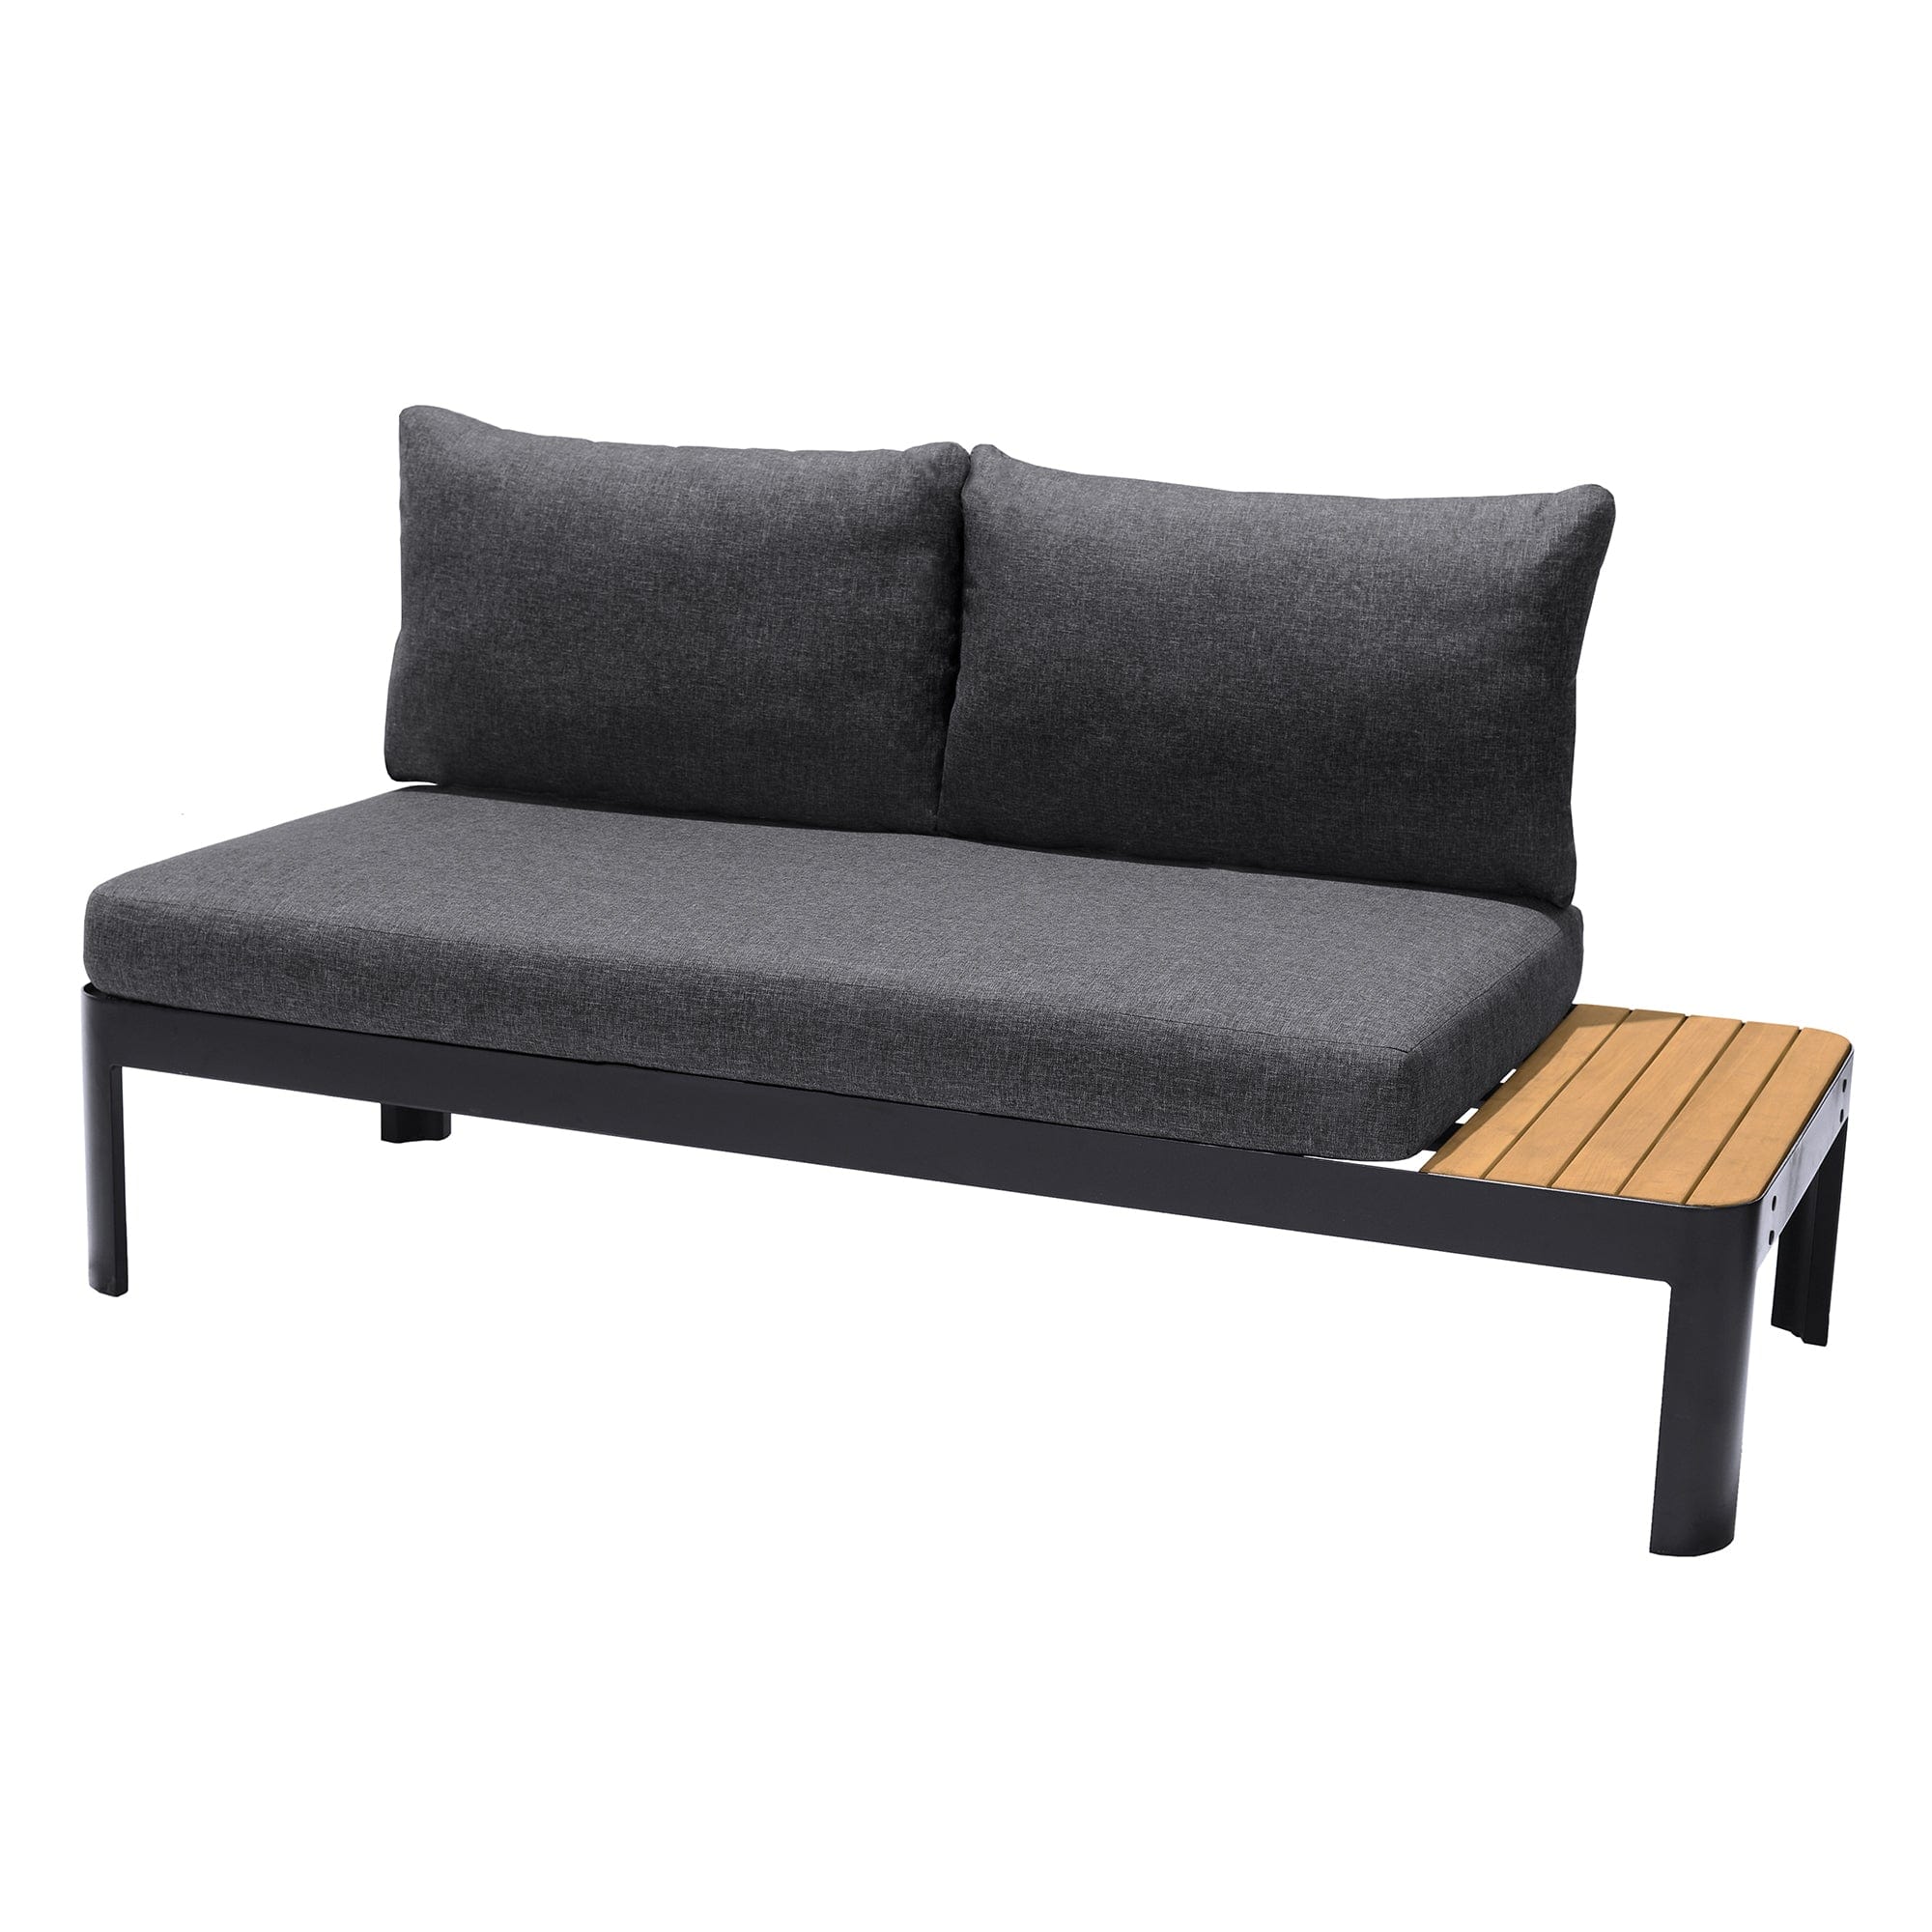 Armen Living Outdoor Sofa Armen Living | Portals Outdoor Sofa in Black Finish with Natural Teak Wood Accent and Grey Cushions | LCPDSODK